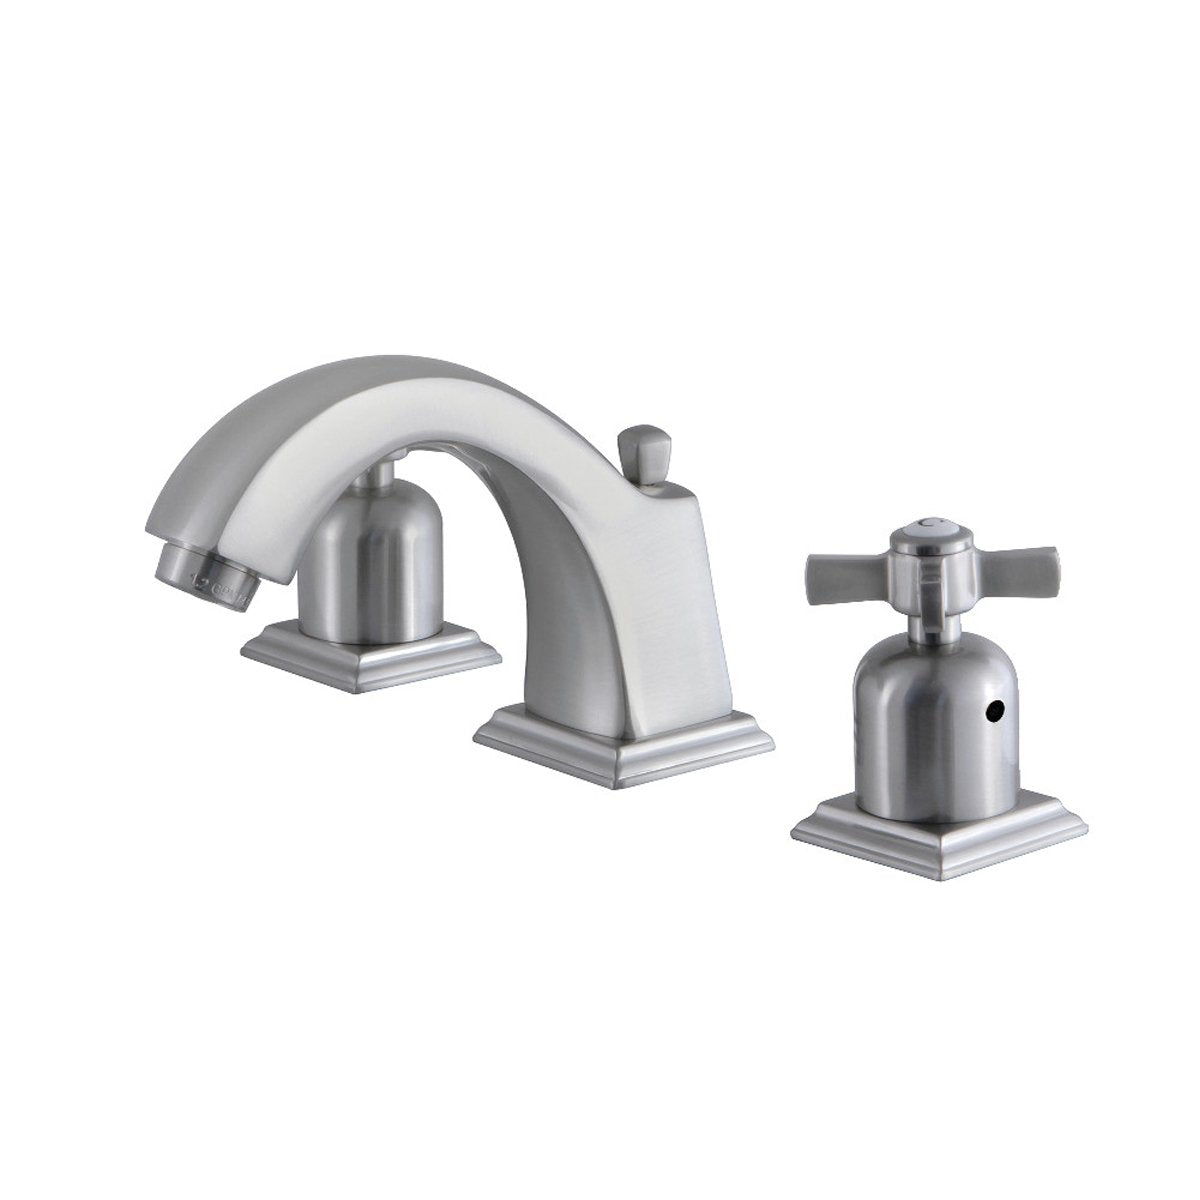 Kingston Brass Fauceture FSC4688ZX 8-Inch Widespread Bathroom Faucet in Brushed Nickel